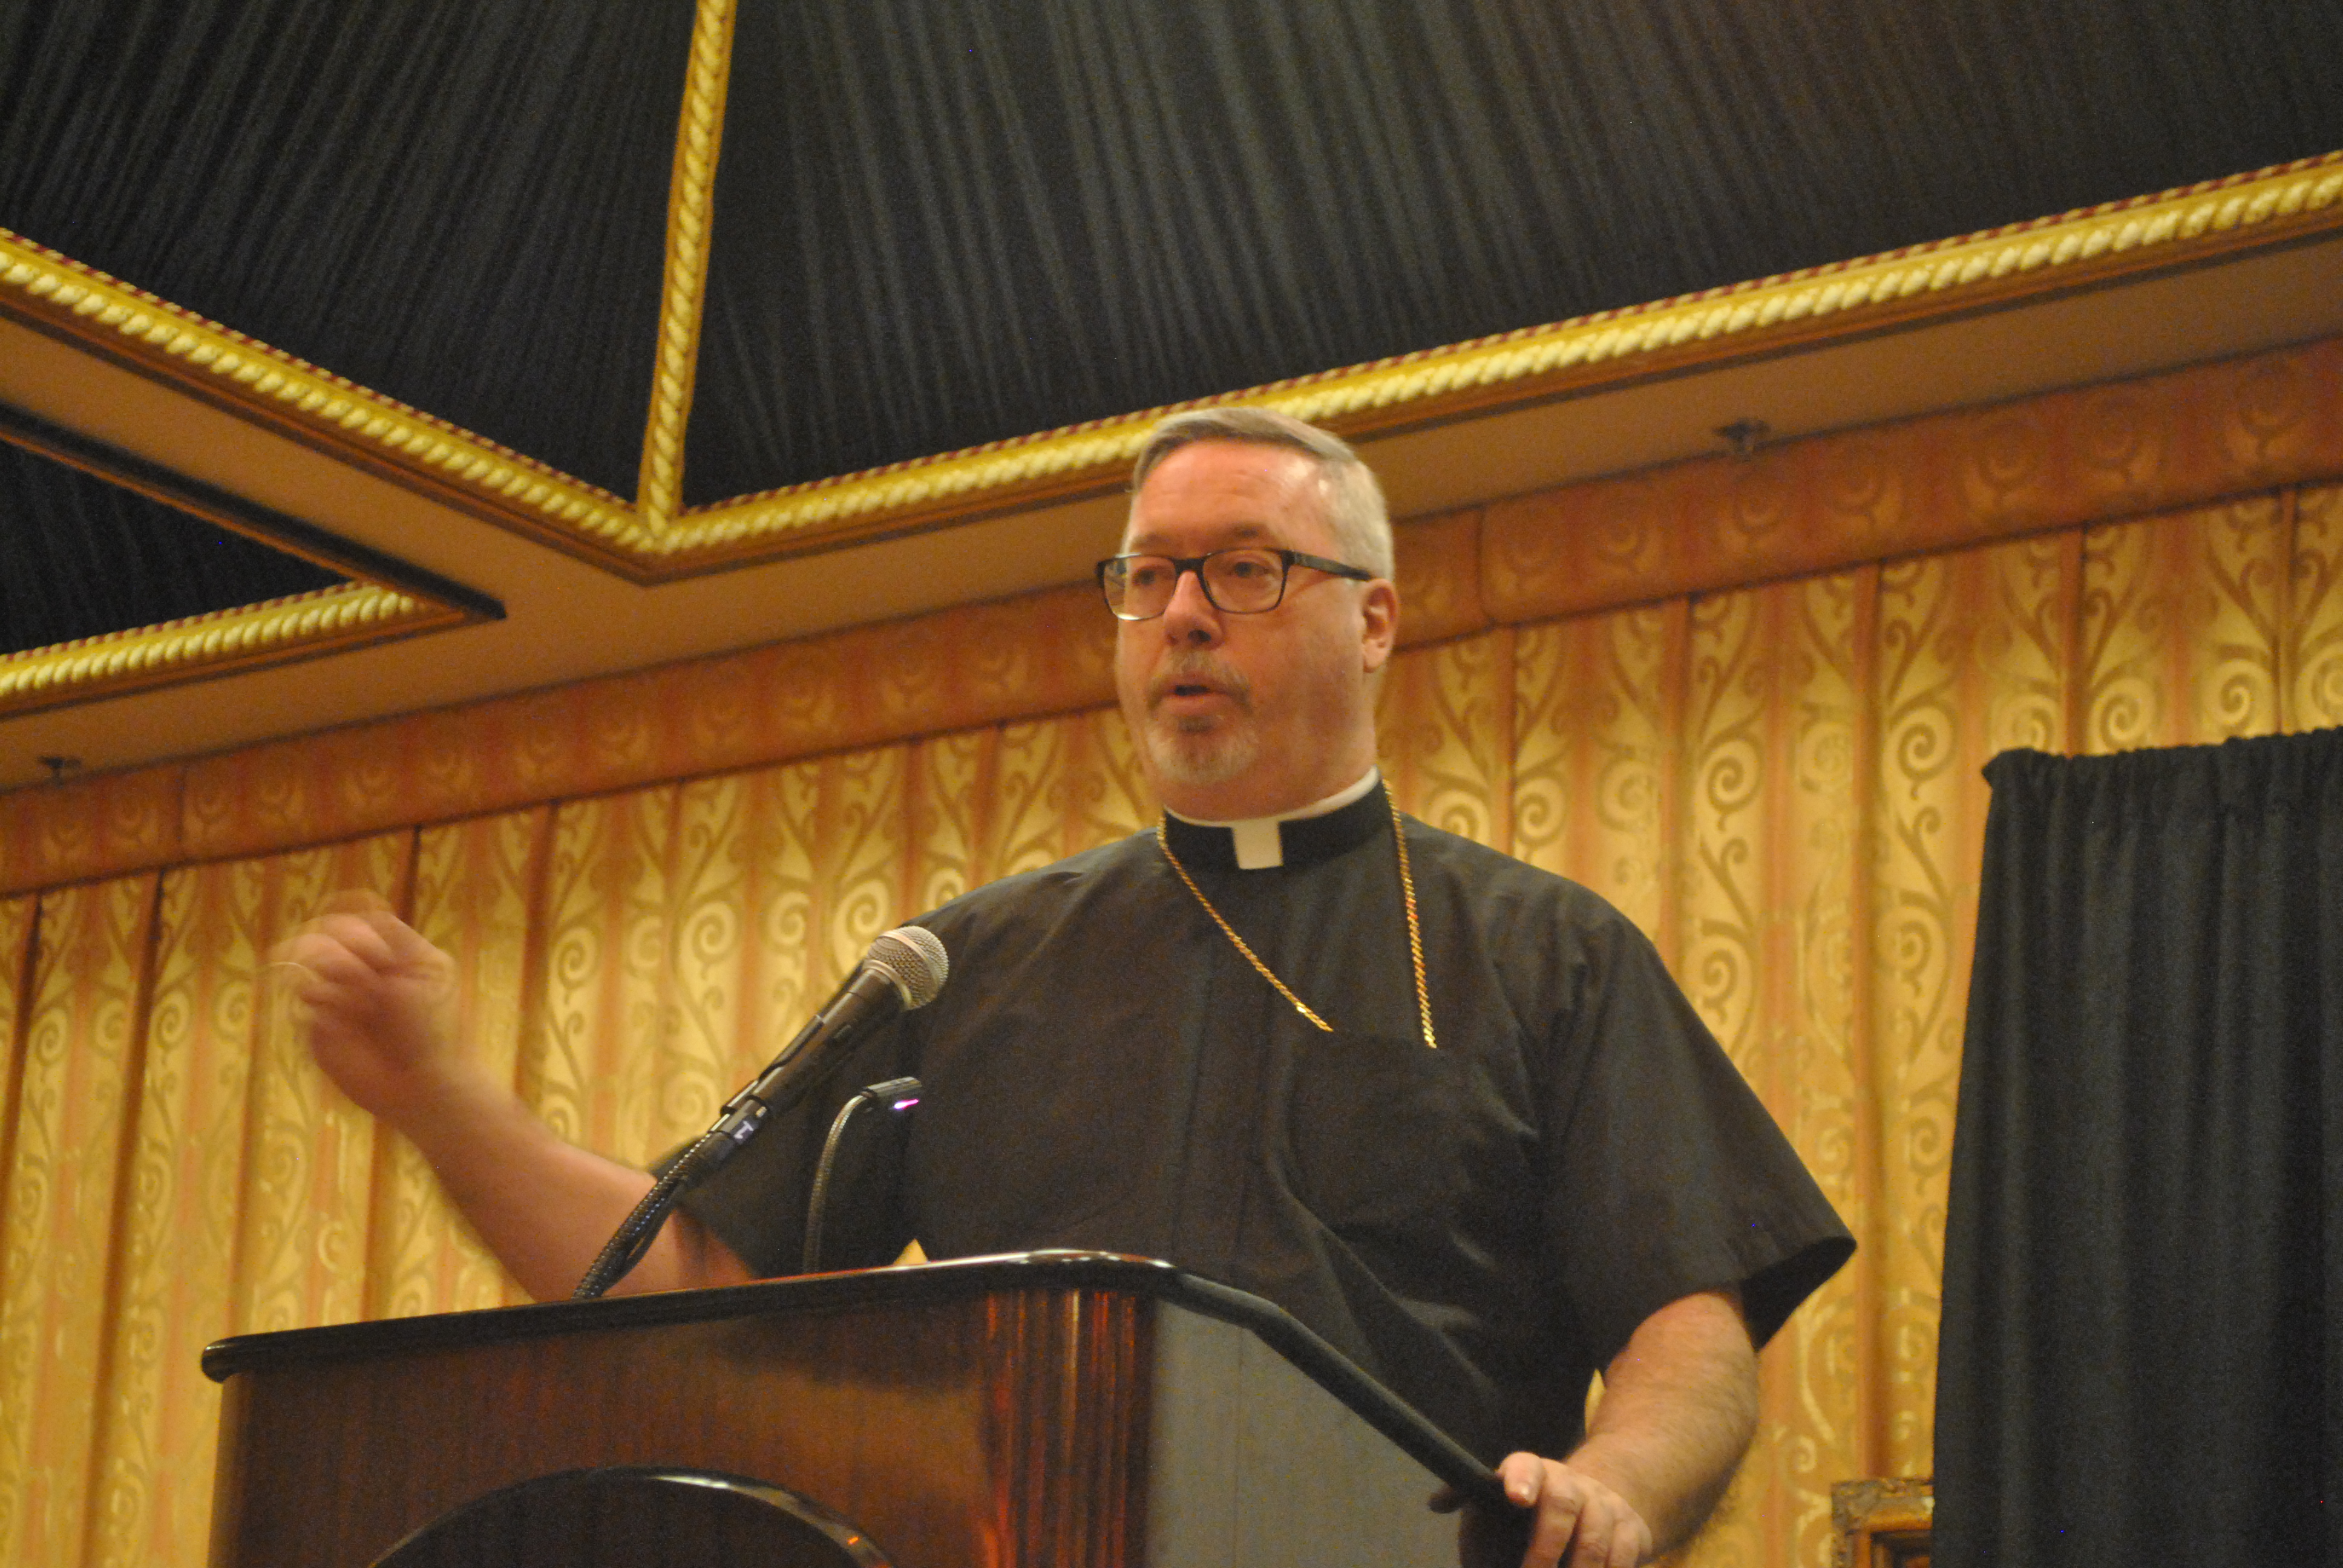 Auxiliary Bishop Christopher Coyne talks April 23 on the importance of liturigical renewal during the 45th annual conference of the National Federation of Priests' Councils. (NCR photo/Brian Roewe)